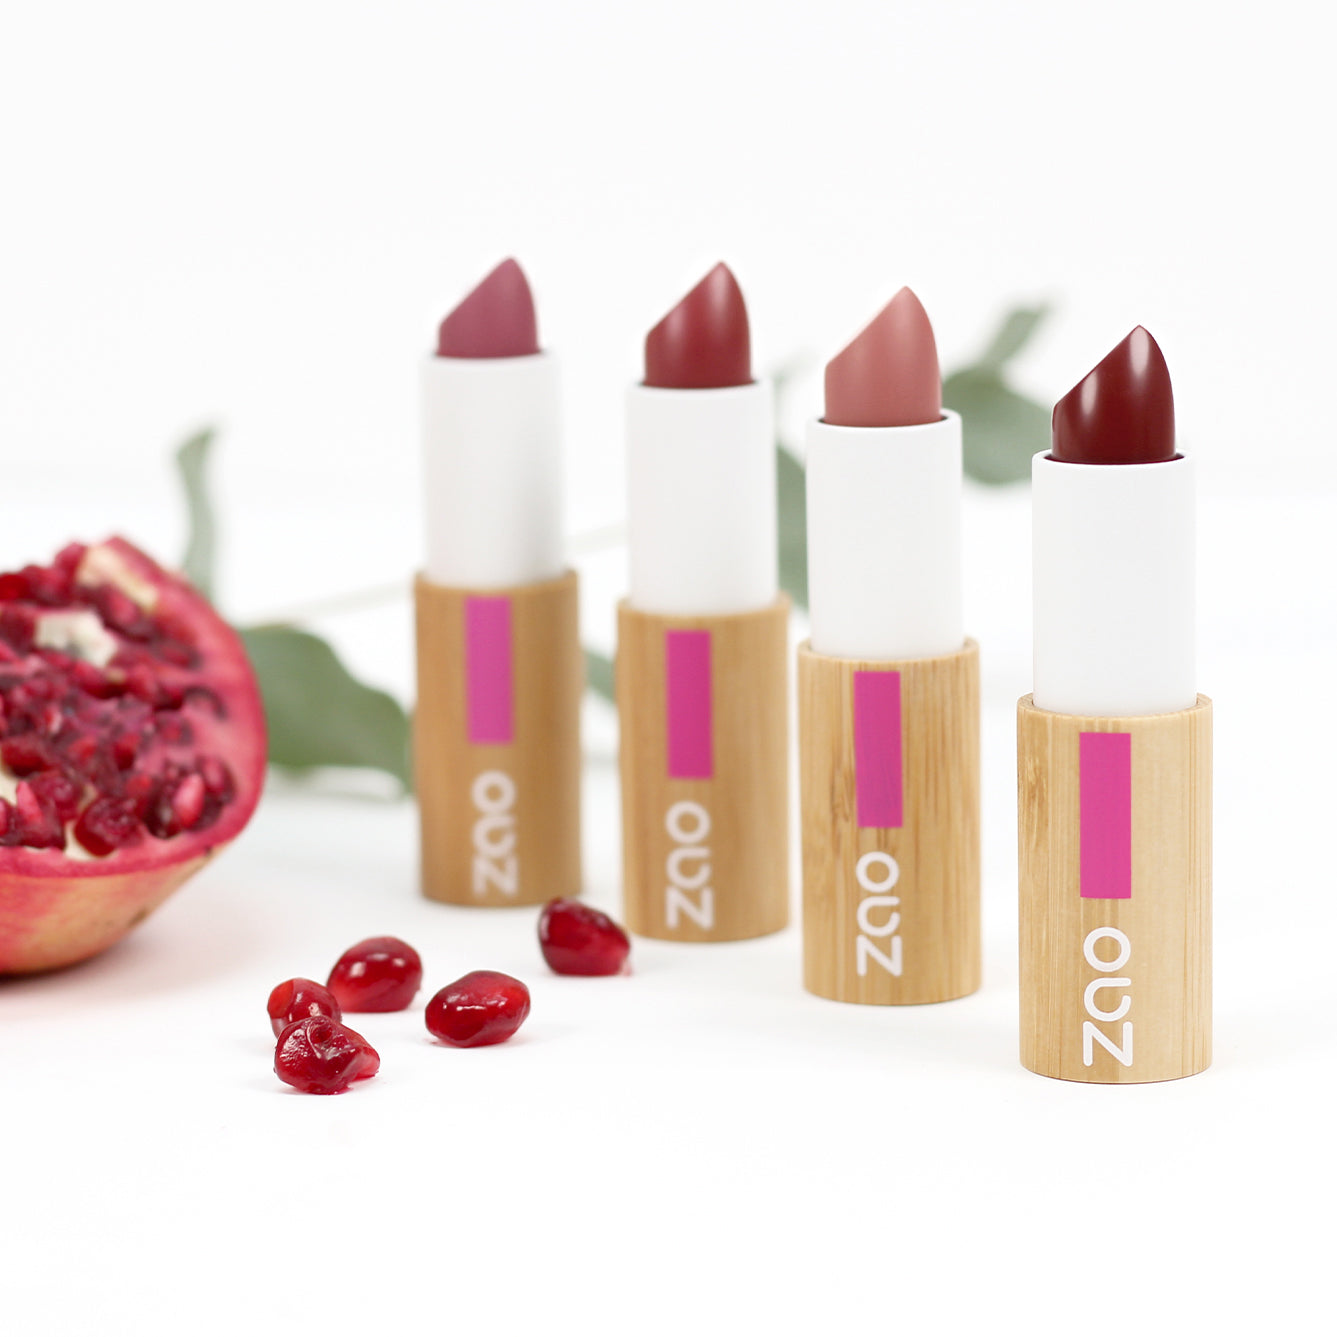 Load image into Gallery viewer, Zao Cocoon Balm Lipstick | Vegan | Cruelty Free | Plastic free Makeup | Intense Colour | Soft Lips
